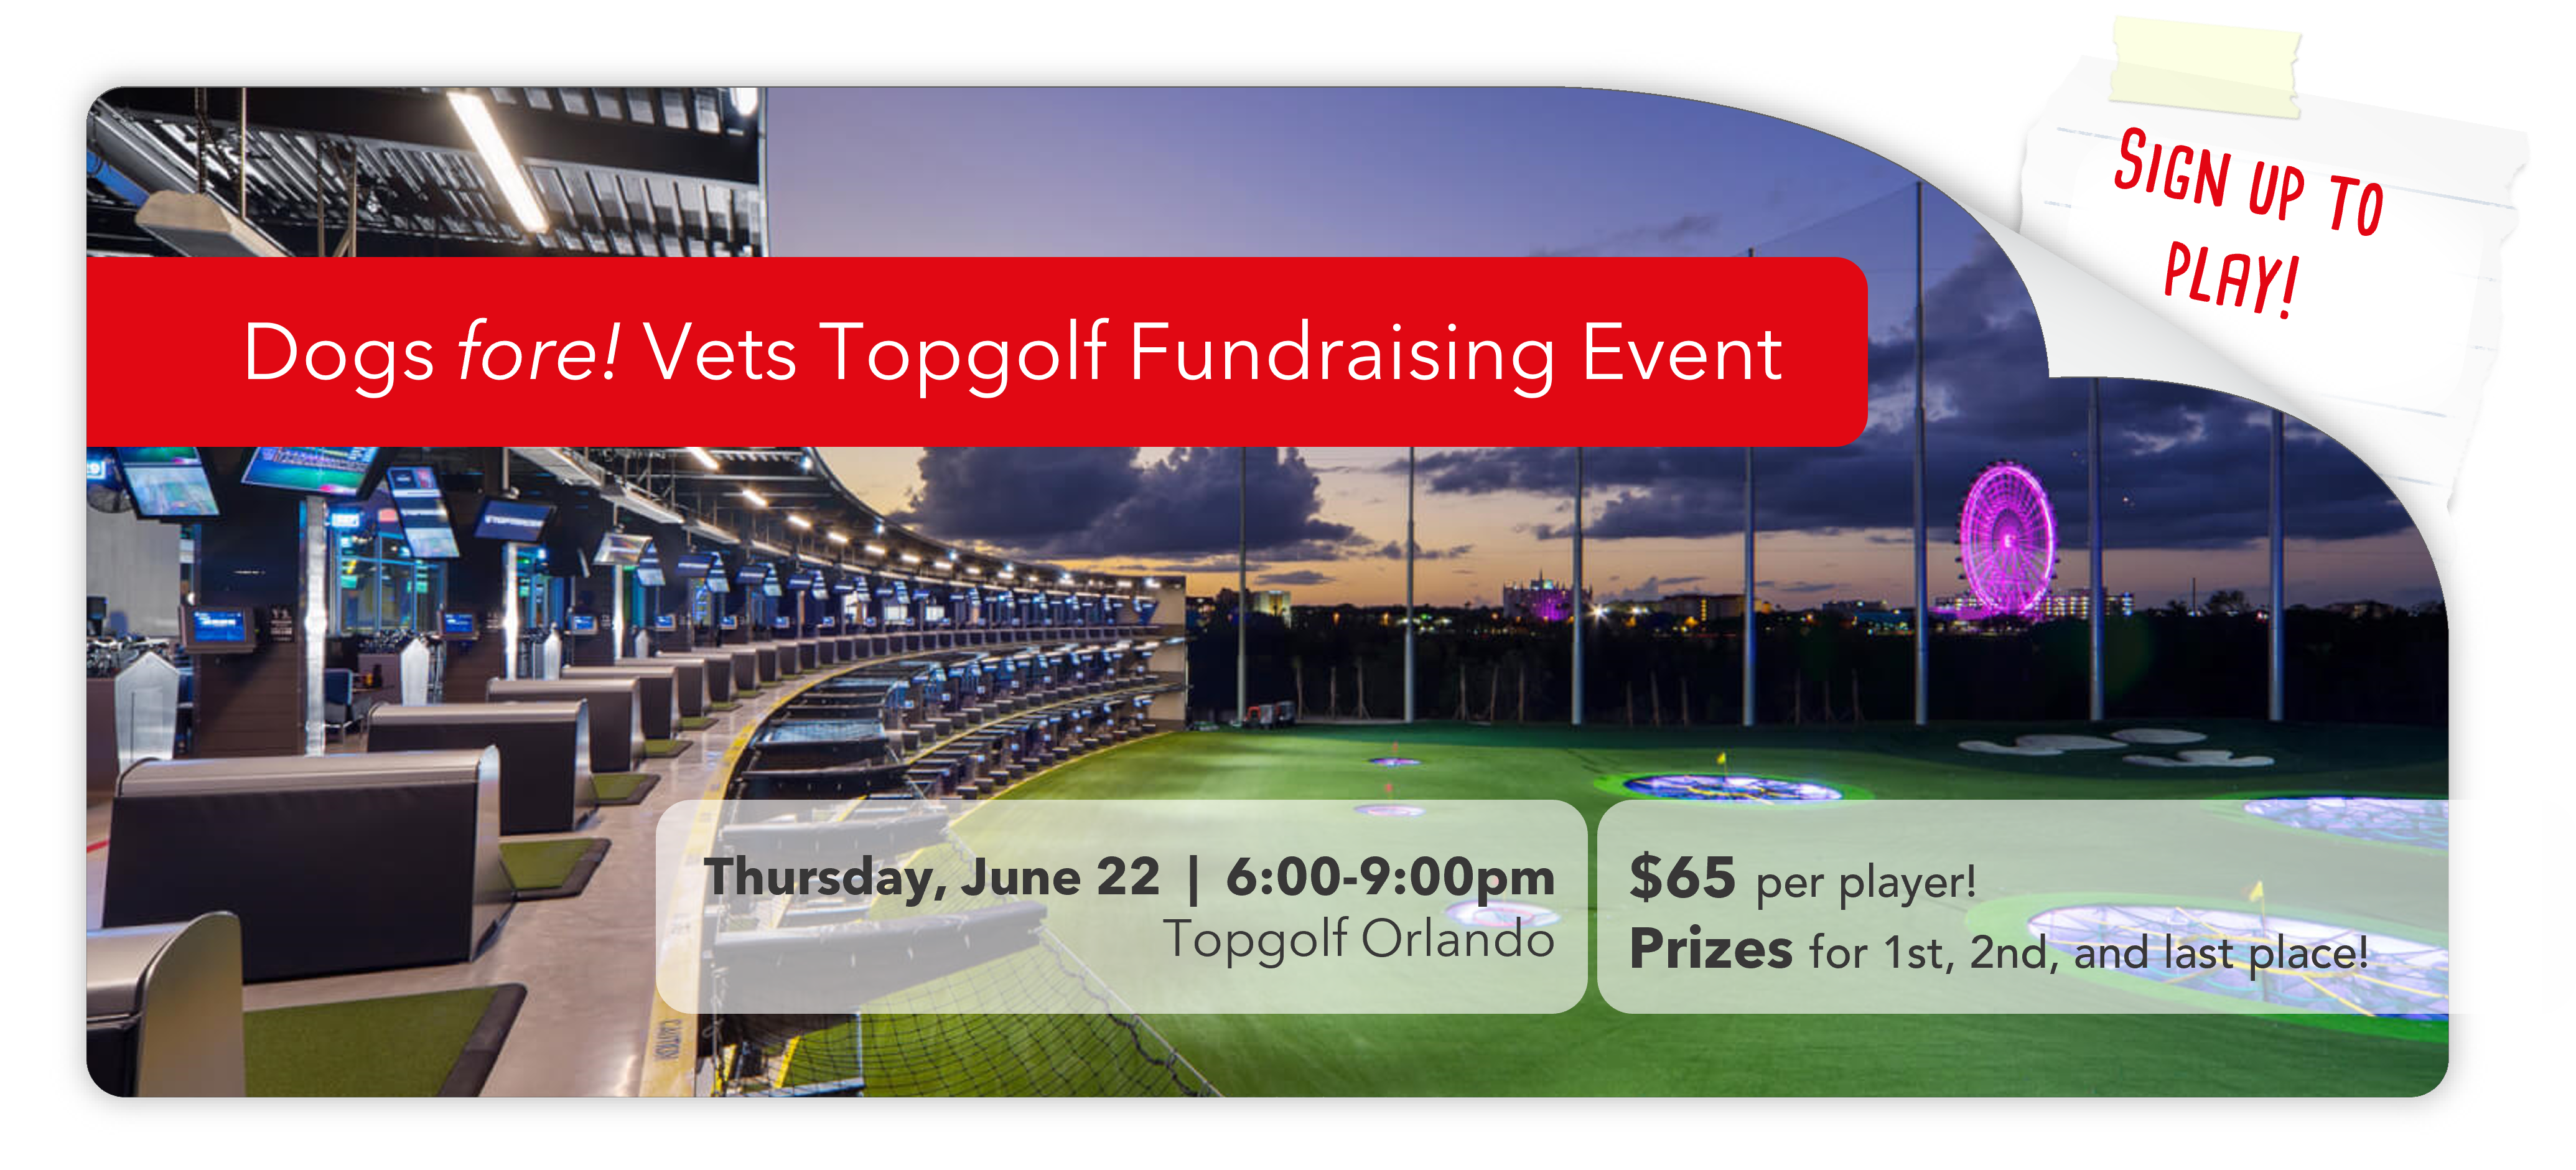 Dogs fore! Vets event 6/22